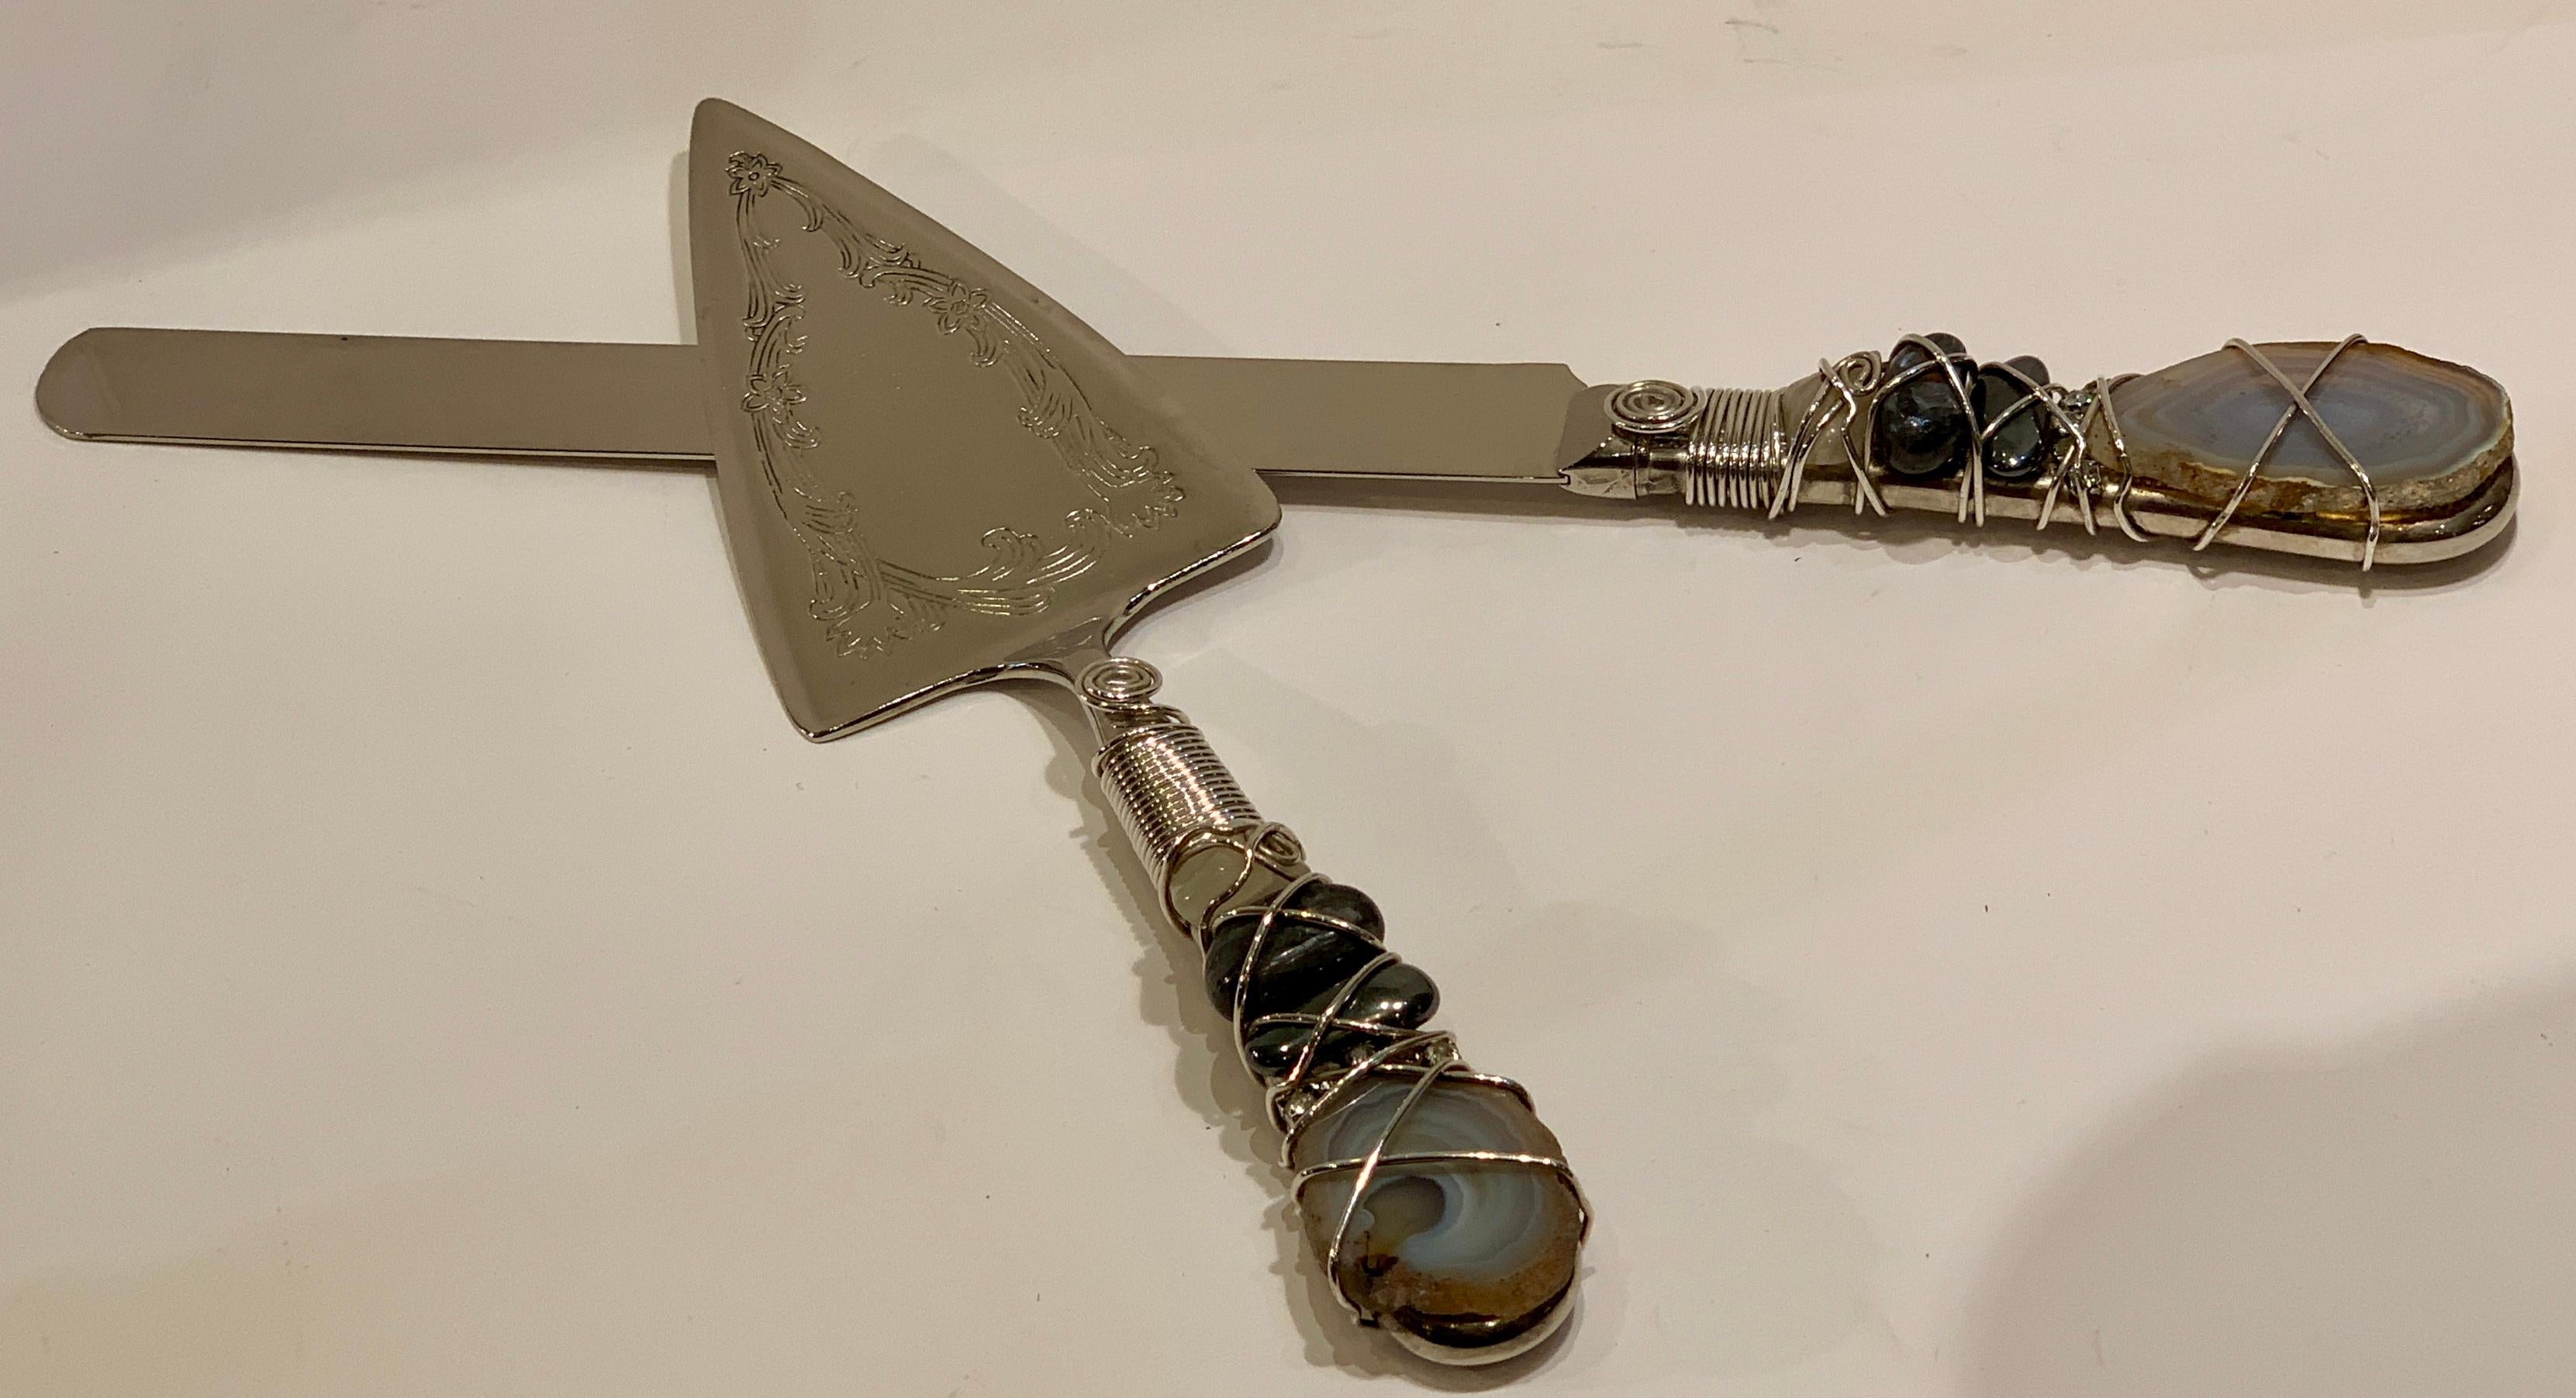 Uniquely Modern Handmade Artisan Silver and Stones Wedding Cake Server Set In Good Condition For Sale In Tustin, CA